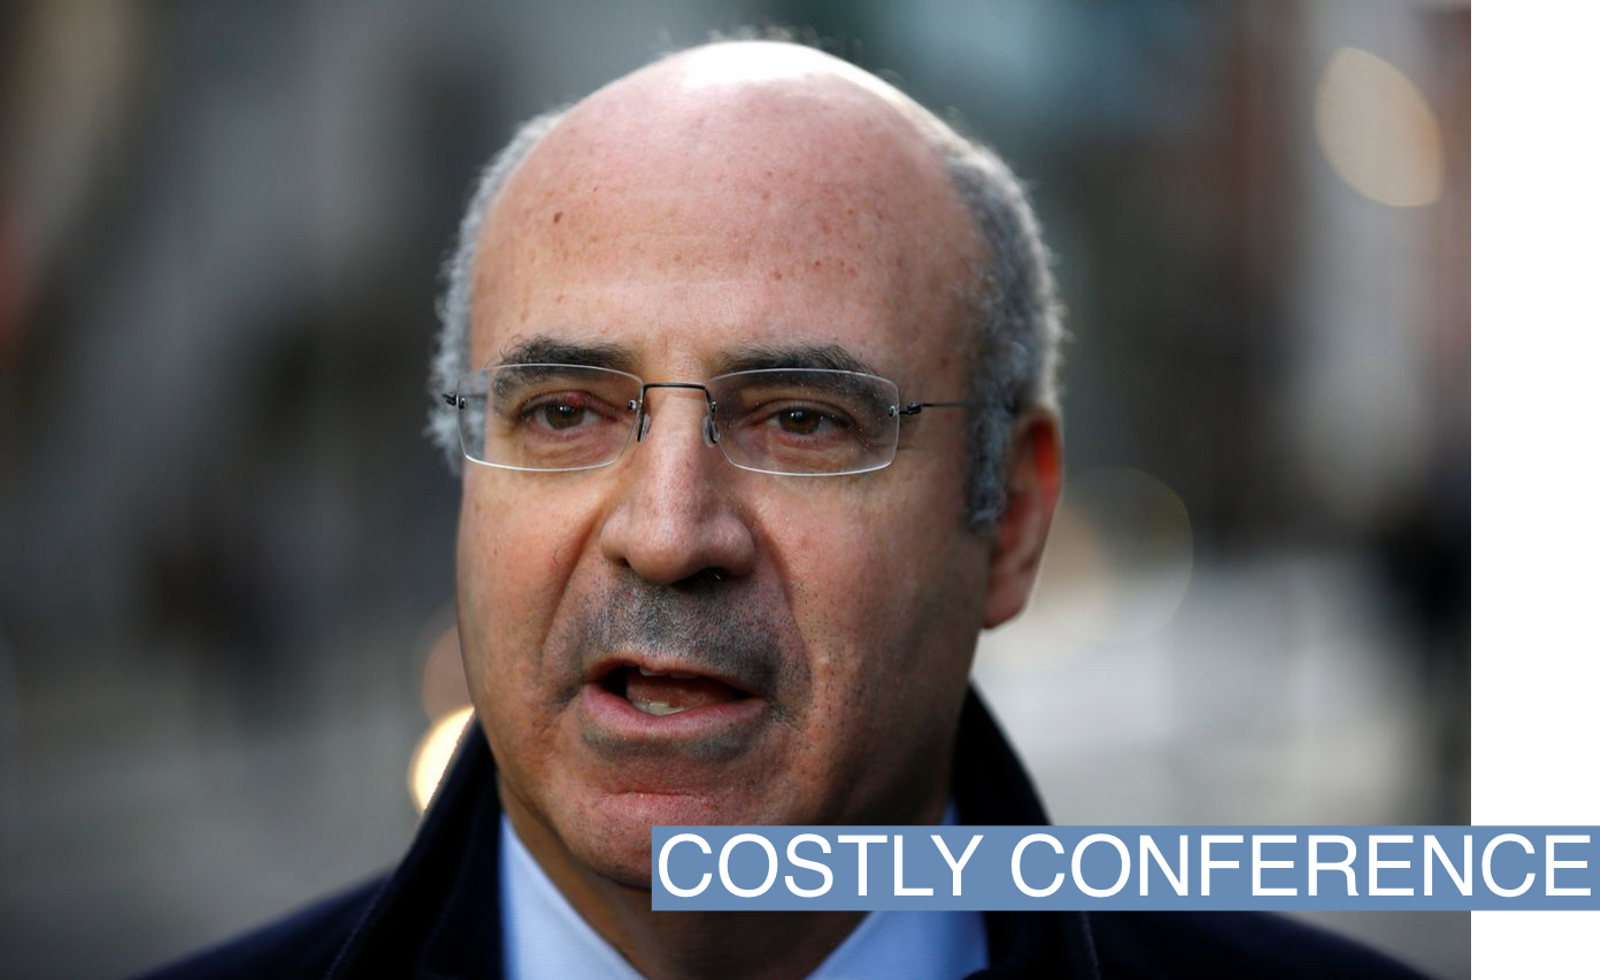 Businessman Bill Browder speaks after the coroner ruled that Russian businessman Alexander Perepilichnyy probably died of natural causes outside his home in 2012, after the inquest concluded at the Old Bailey, in London, Britain, December 19, 2018 